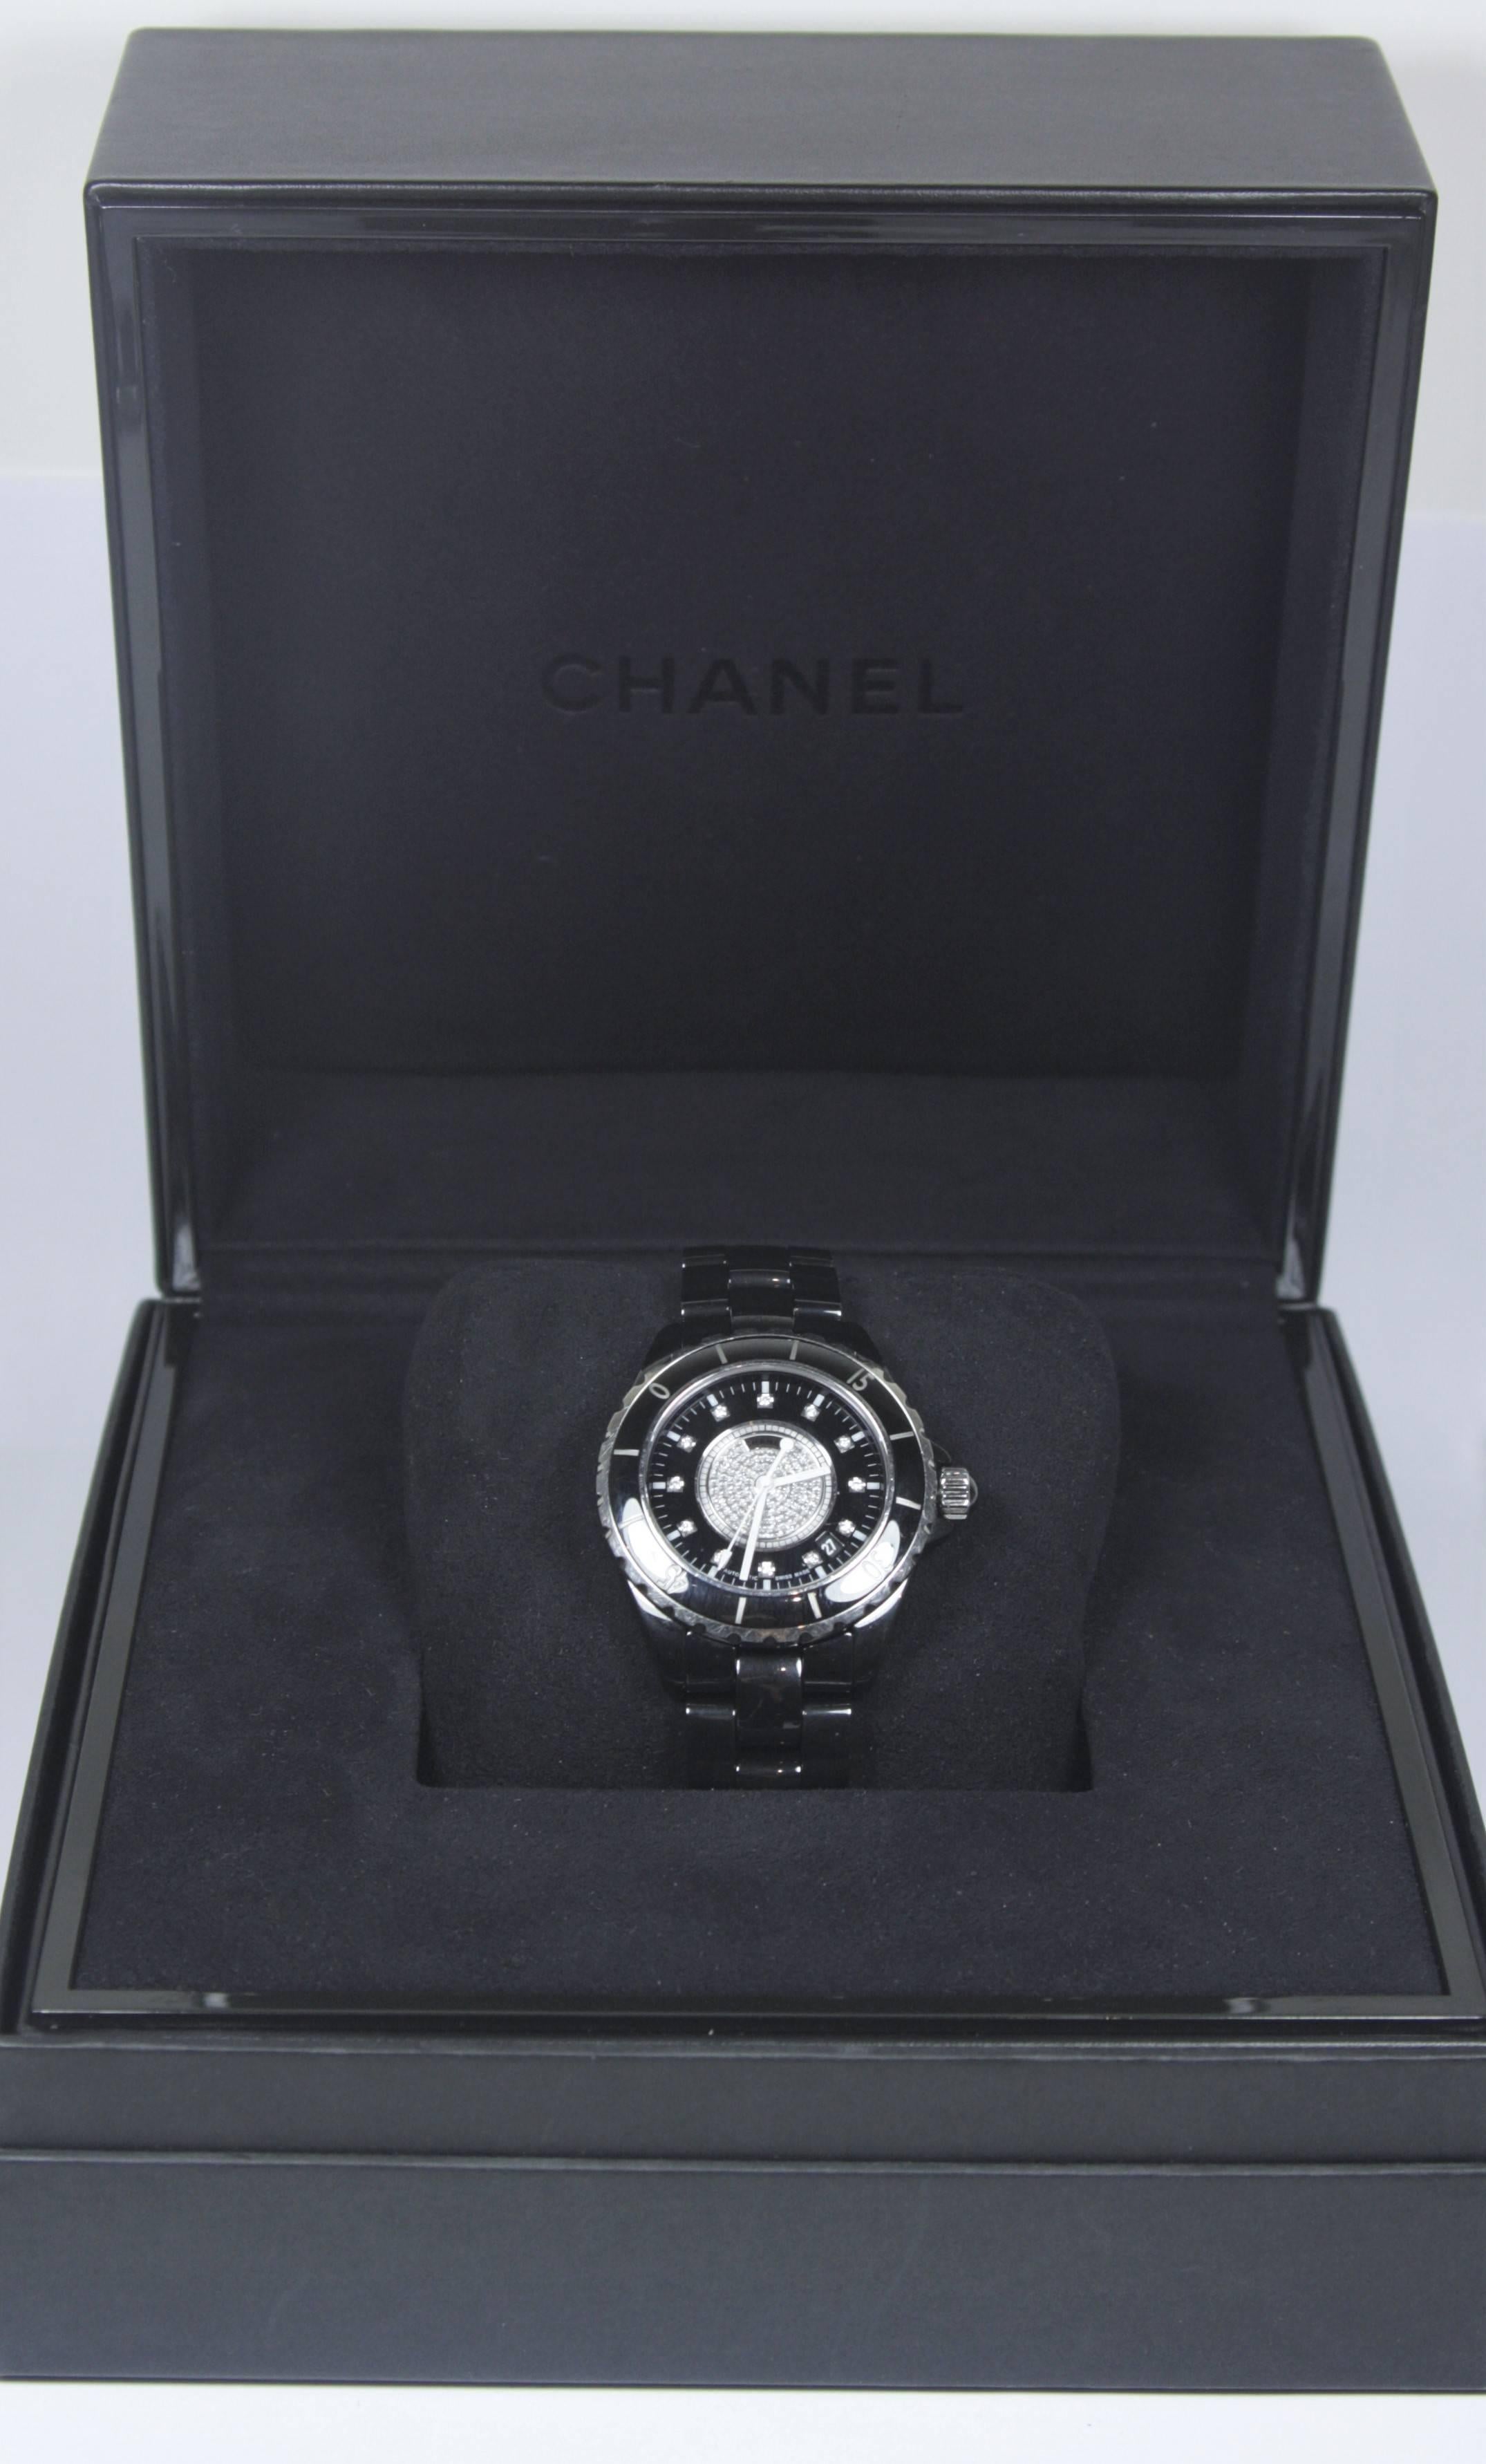 CHANEL Automatic J12 39mm Black Ceramic Watch with Diamond Pave Face   1